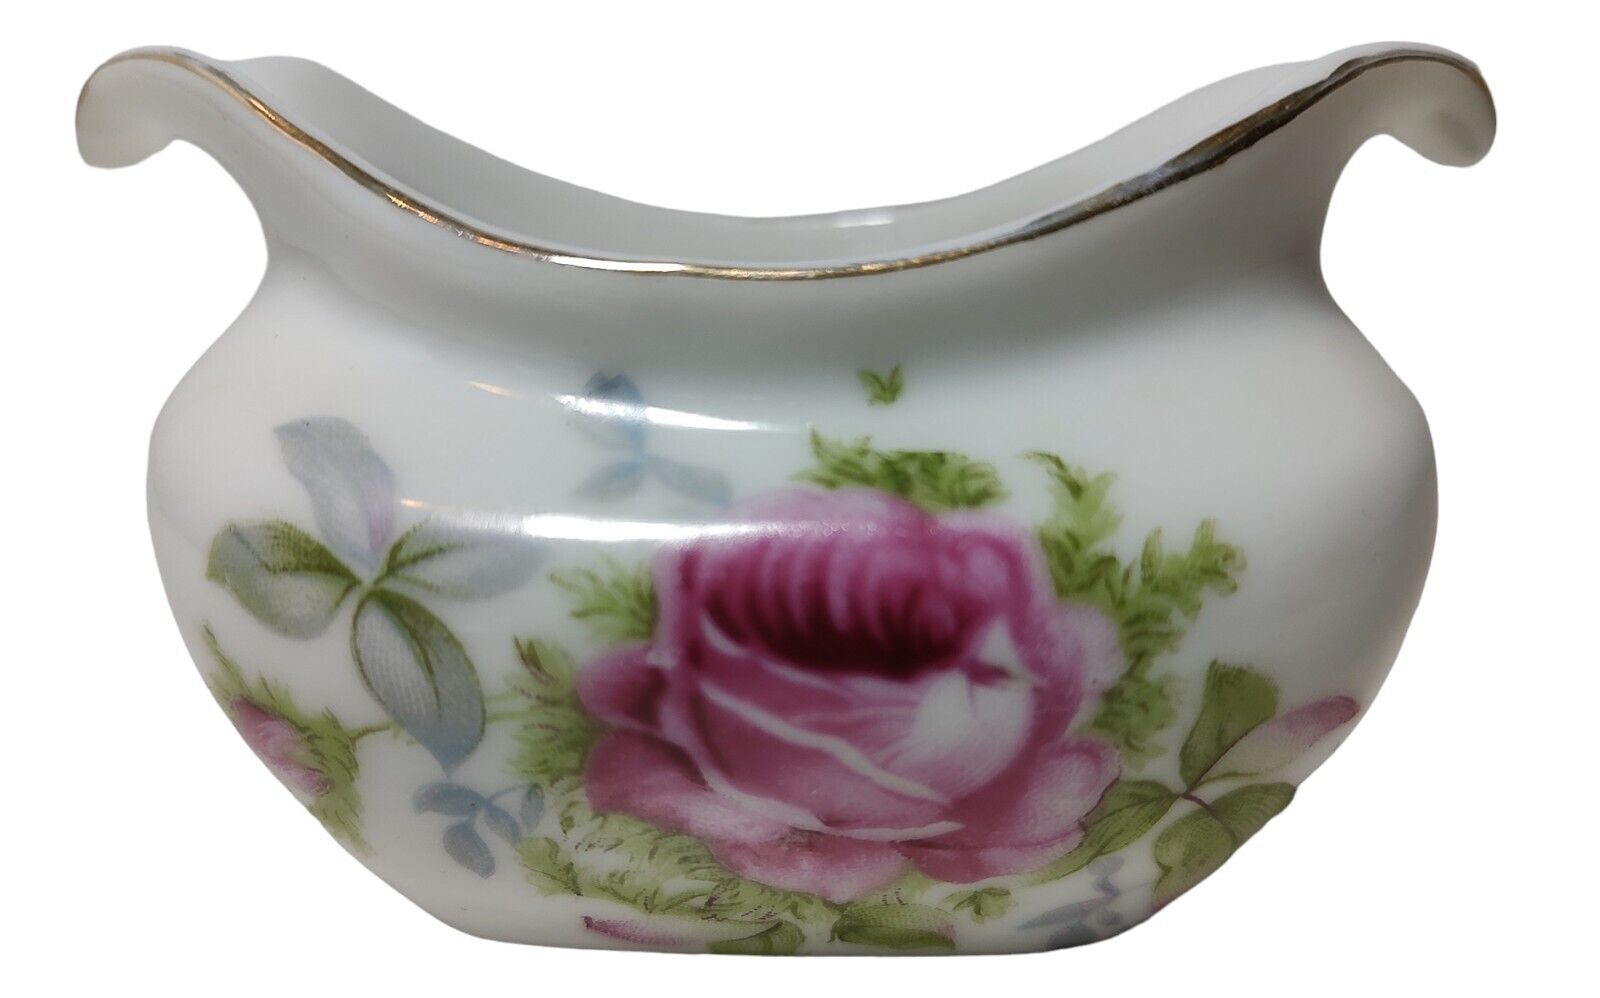 Vintage Lefton China Open Sugar Bowl Small Rose Handpainted Porcelain 1950s SEE